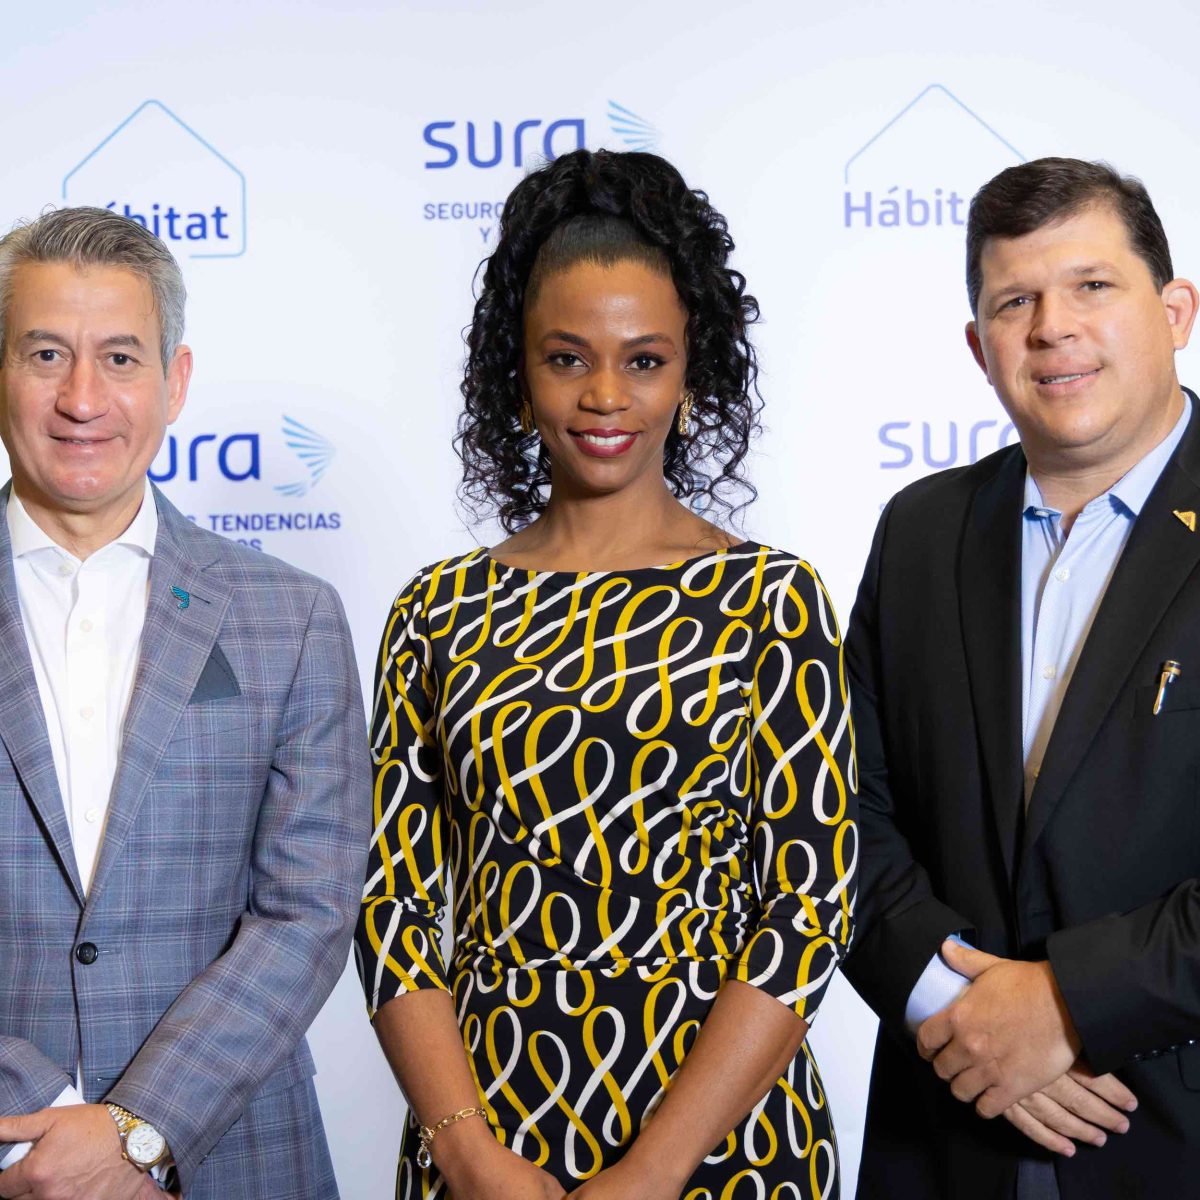 SURA and ACOPROVI talk about trends and transformations in the construction sector